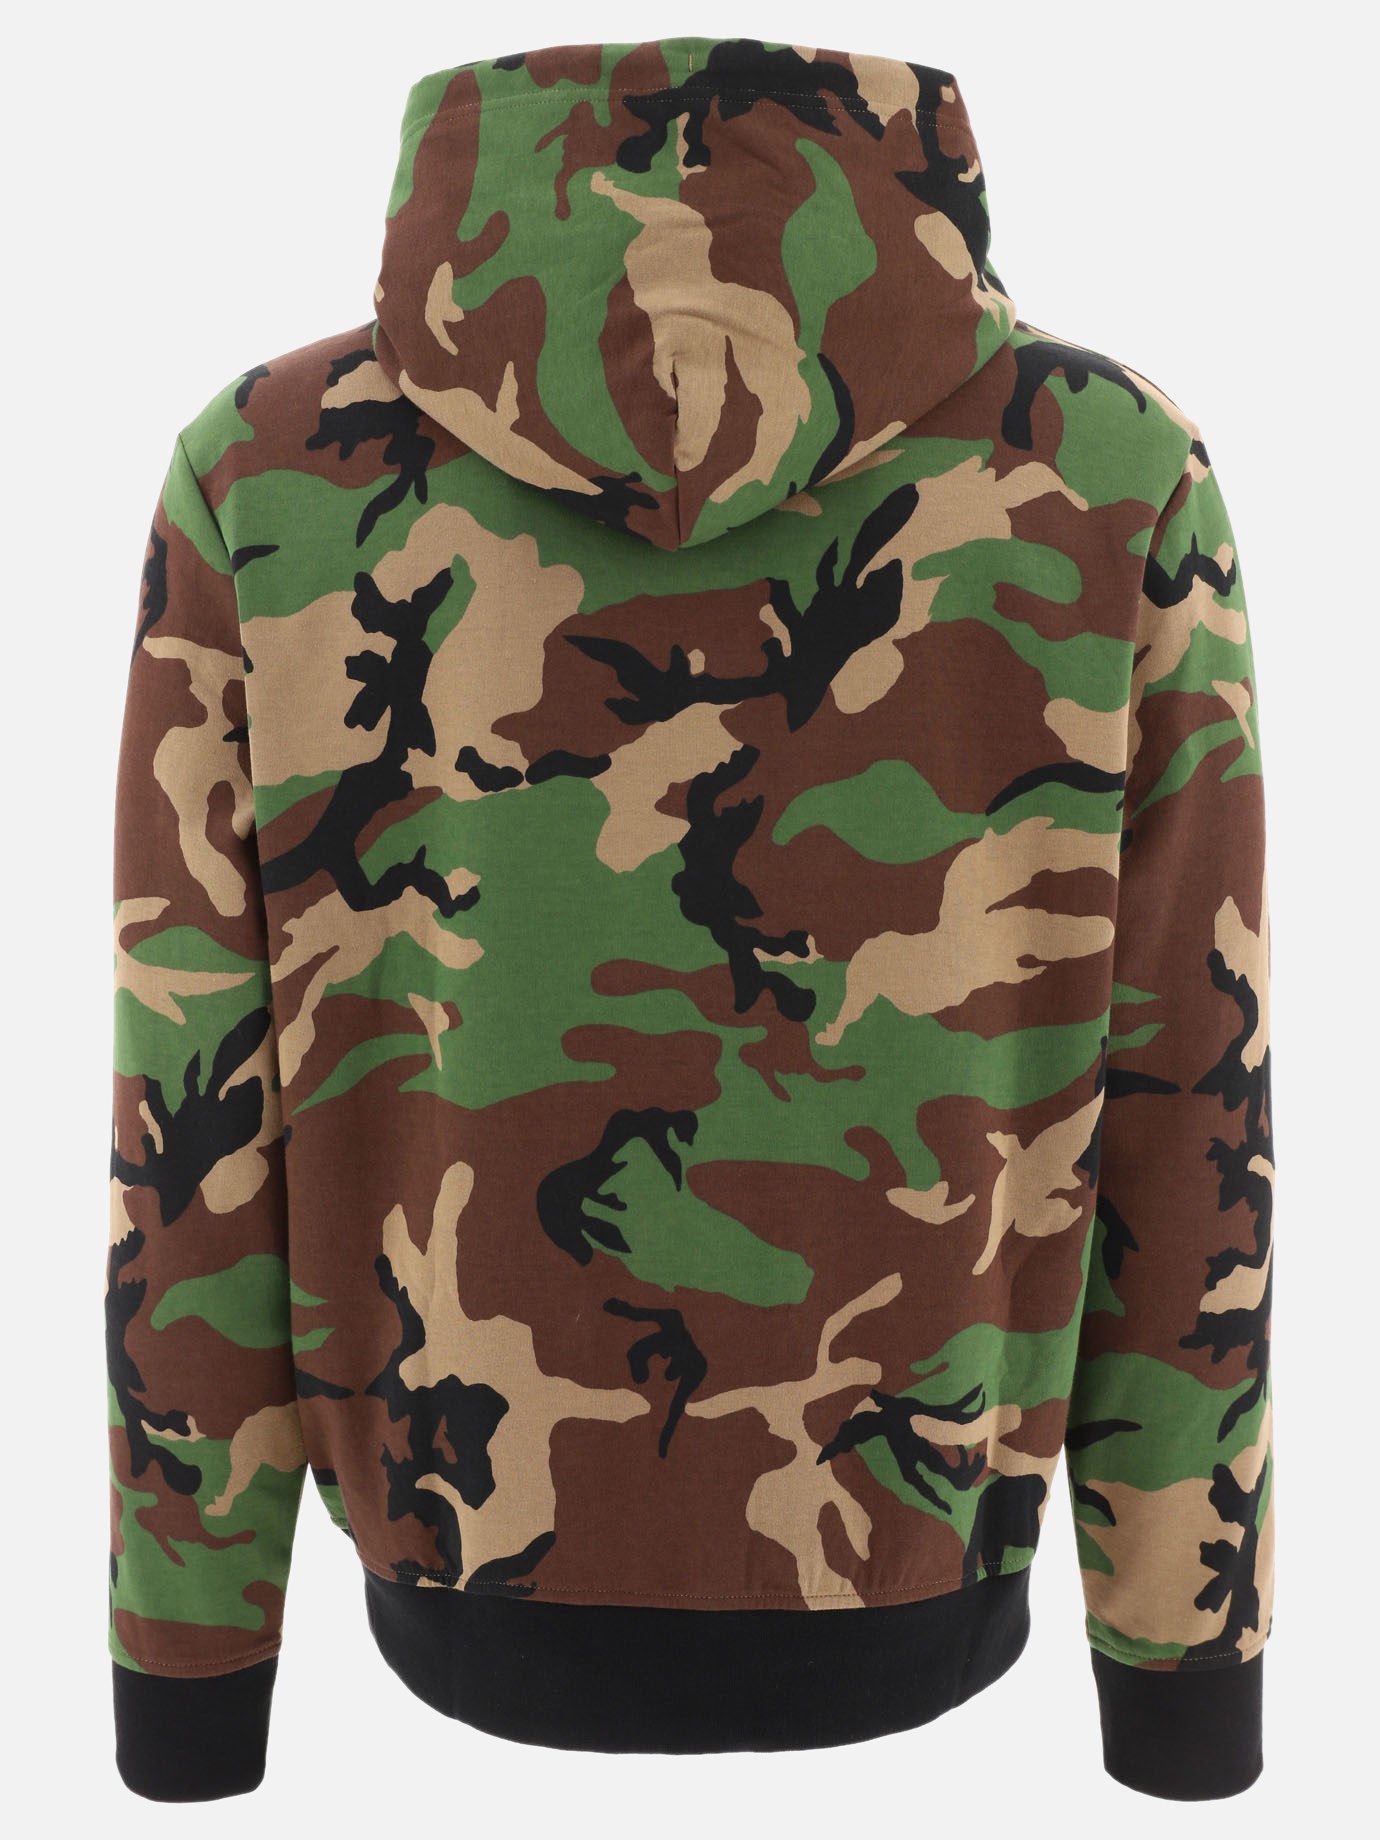  Pony  camouflage hoodie by Polo Ralph Lauren